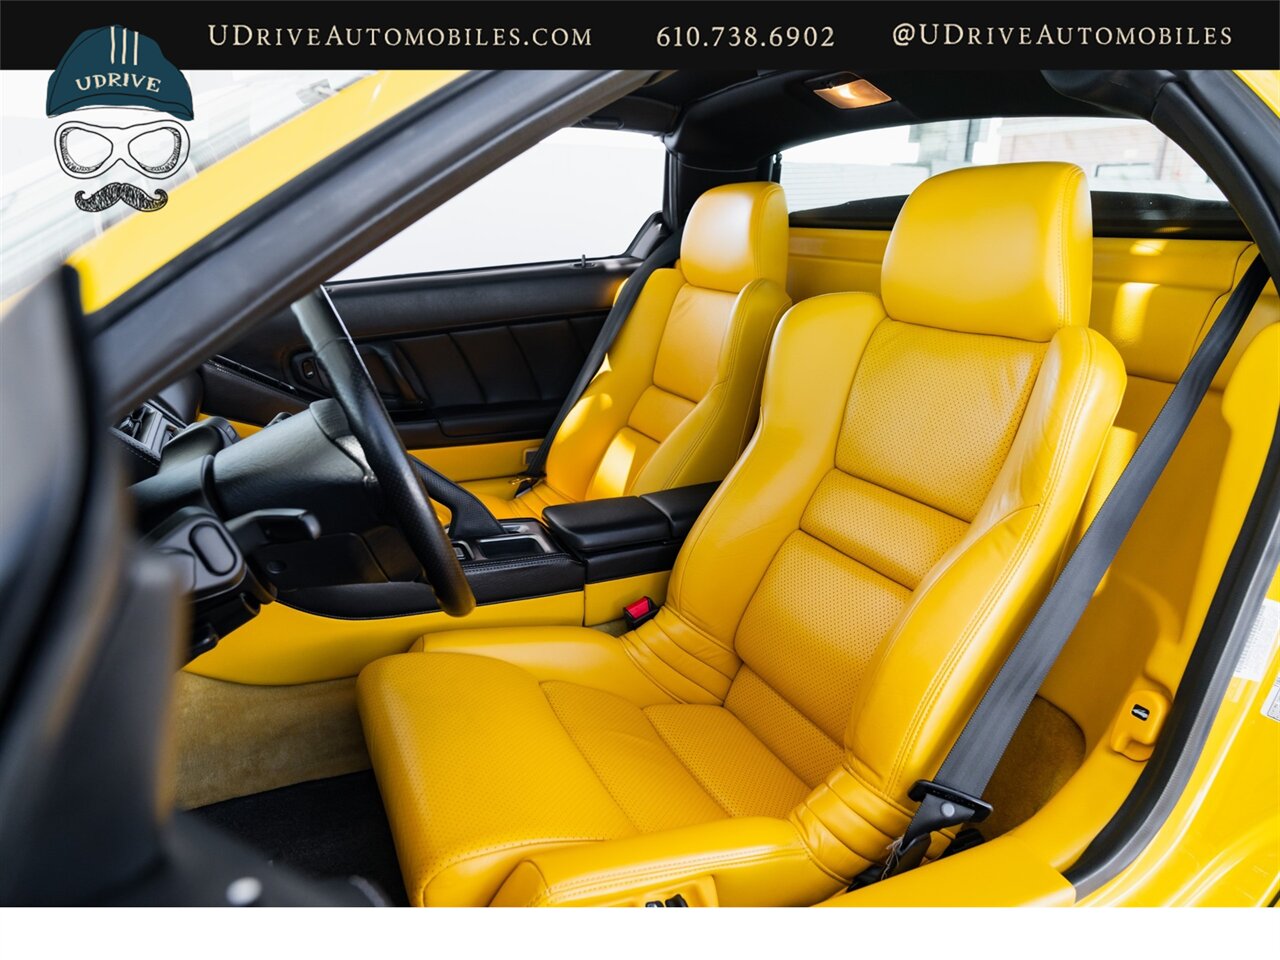 2003 Acura NSX NSX-T  Spa Yellow over Yellow Lthr 1 of 13 Produced - Photo 5 - West Chester, PA 19382